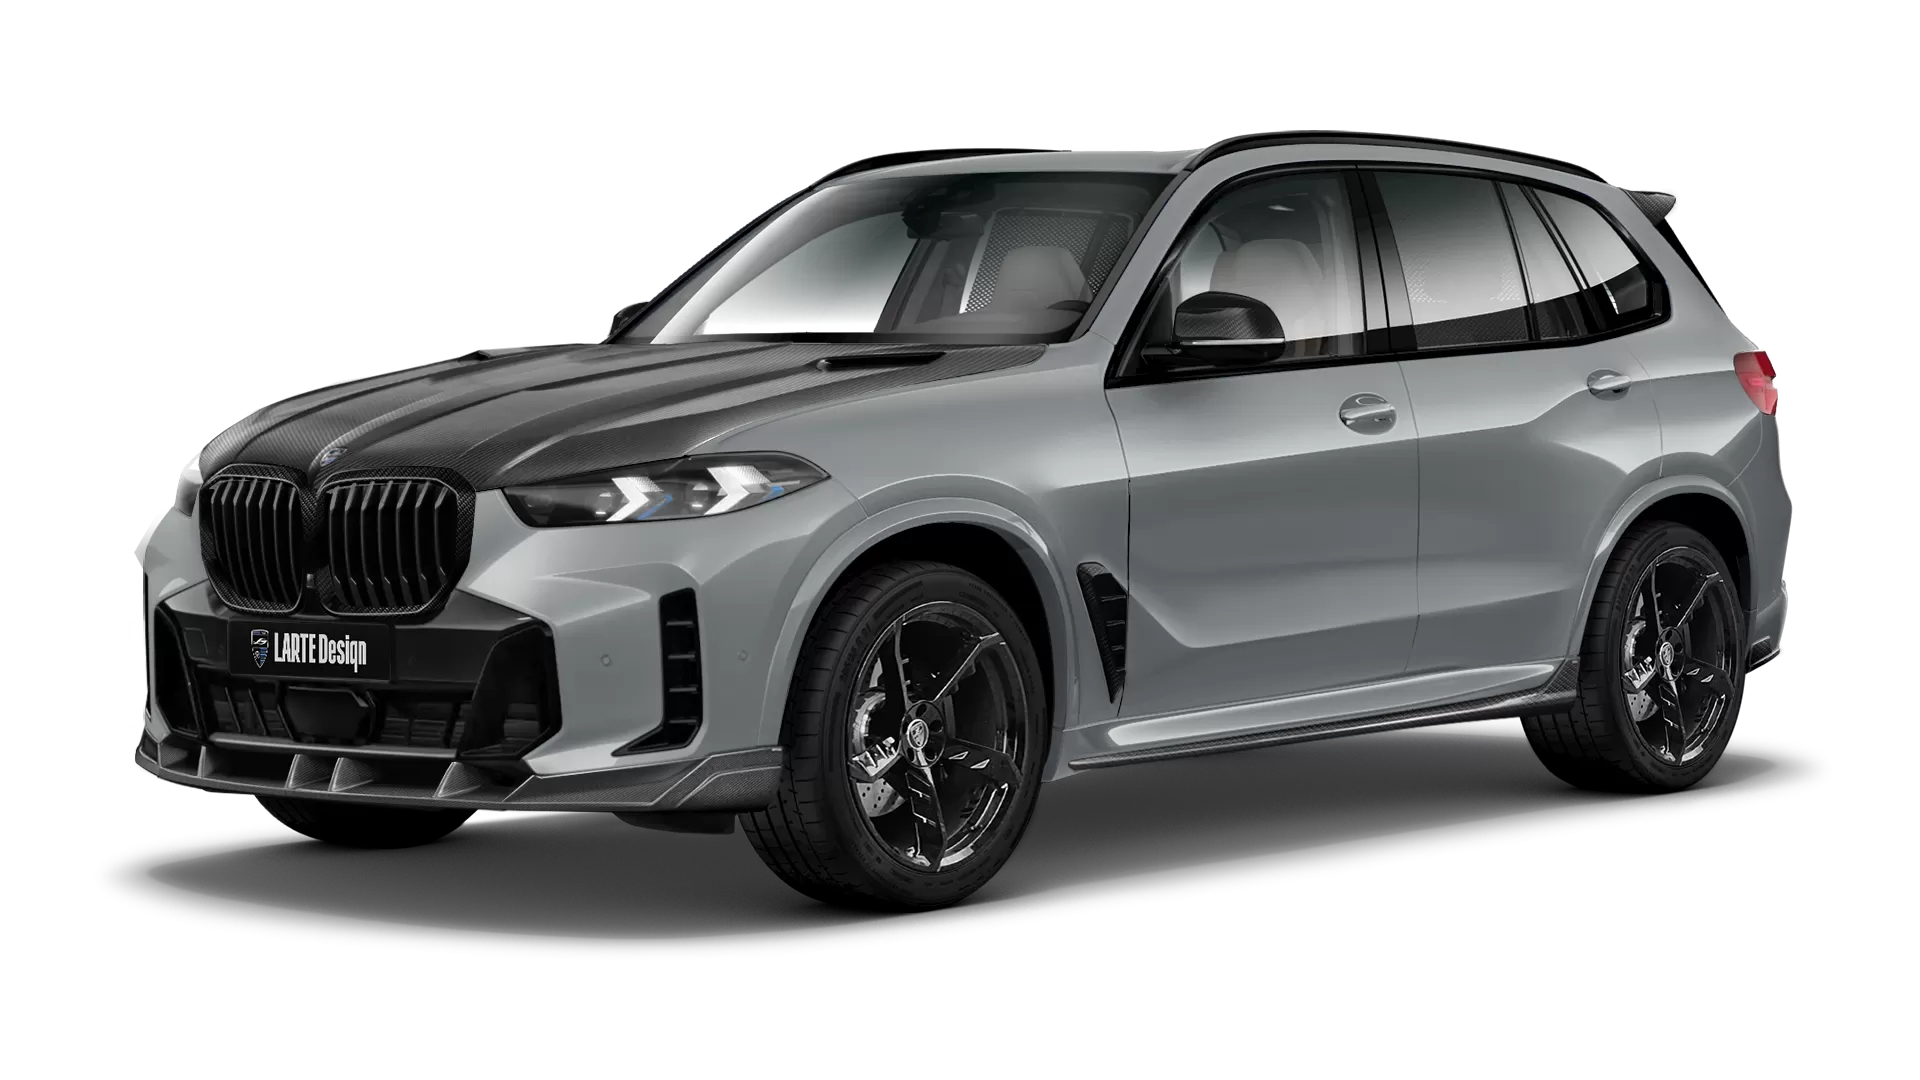 BMW X5 G05 LCI Facelift with carbon body kit: front view shown in Brooklyn Grey